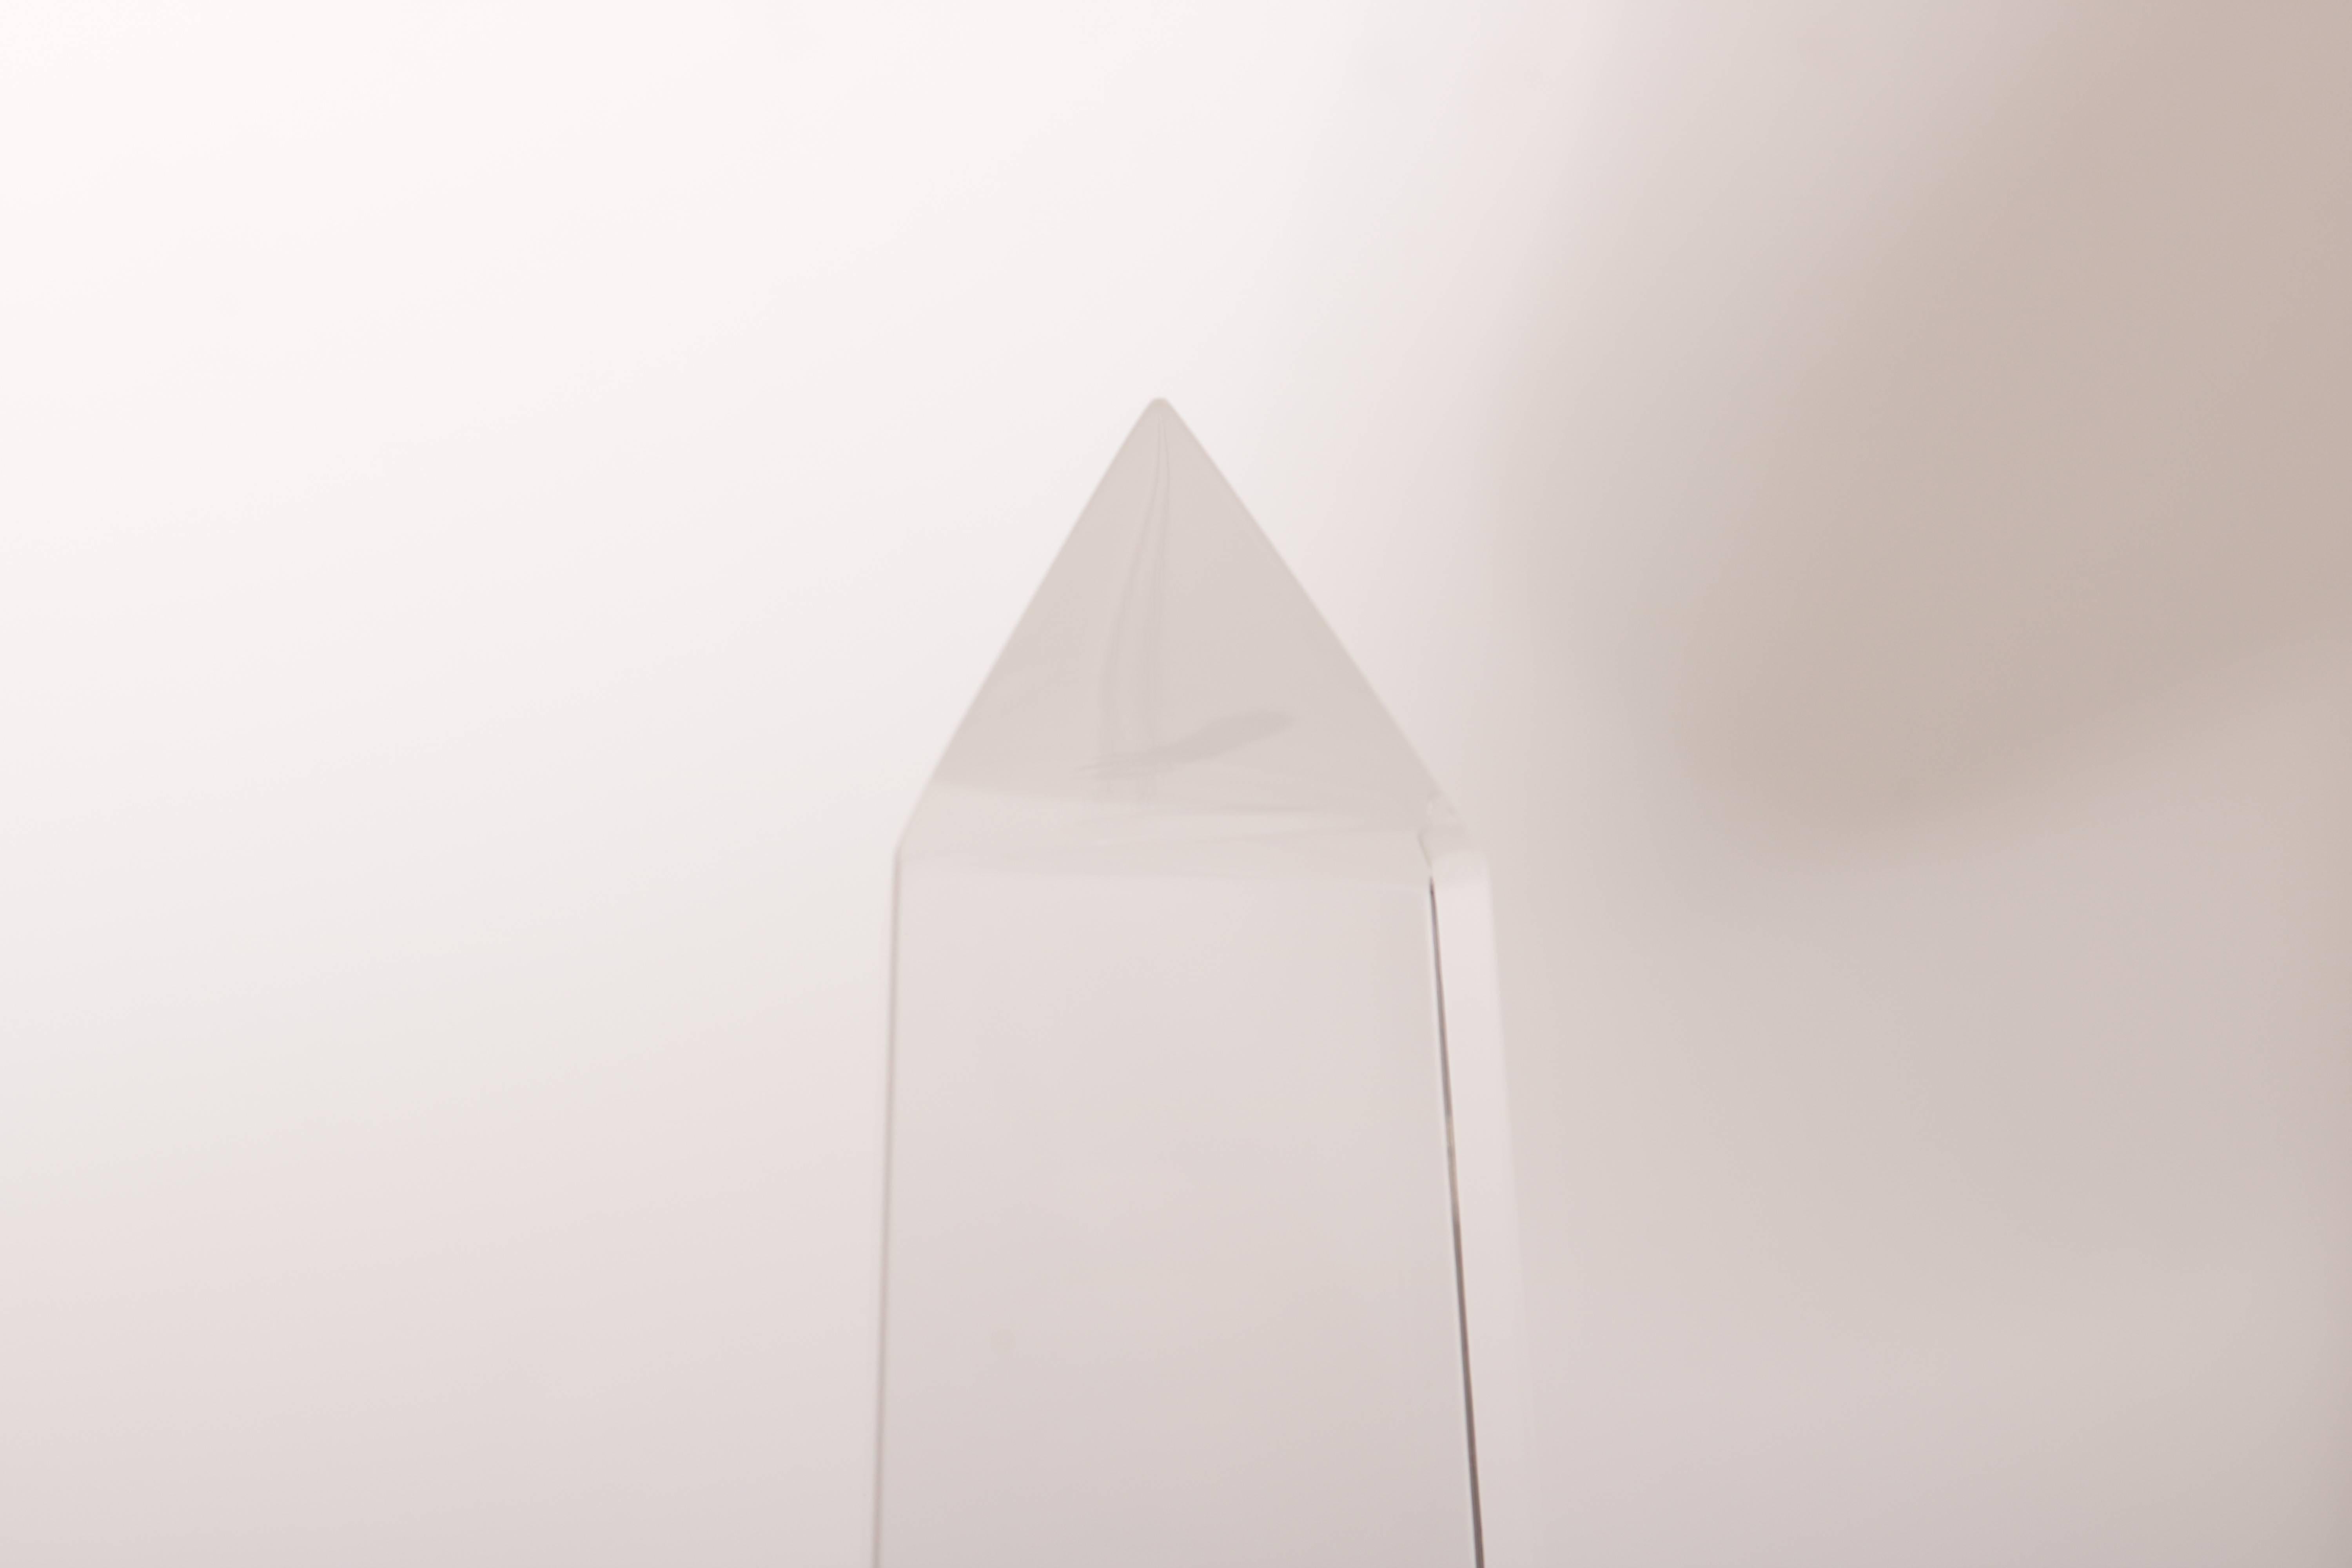 This stylish obelisk will make the perfect addition to your collection or perhaps the beginning of one and this would make a statement piece on a centre table.

For best net trade price or additional questions regarding this item, please click the